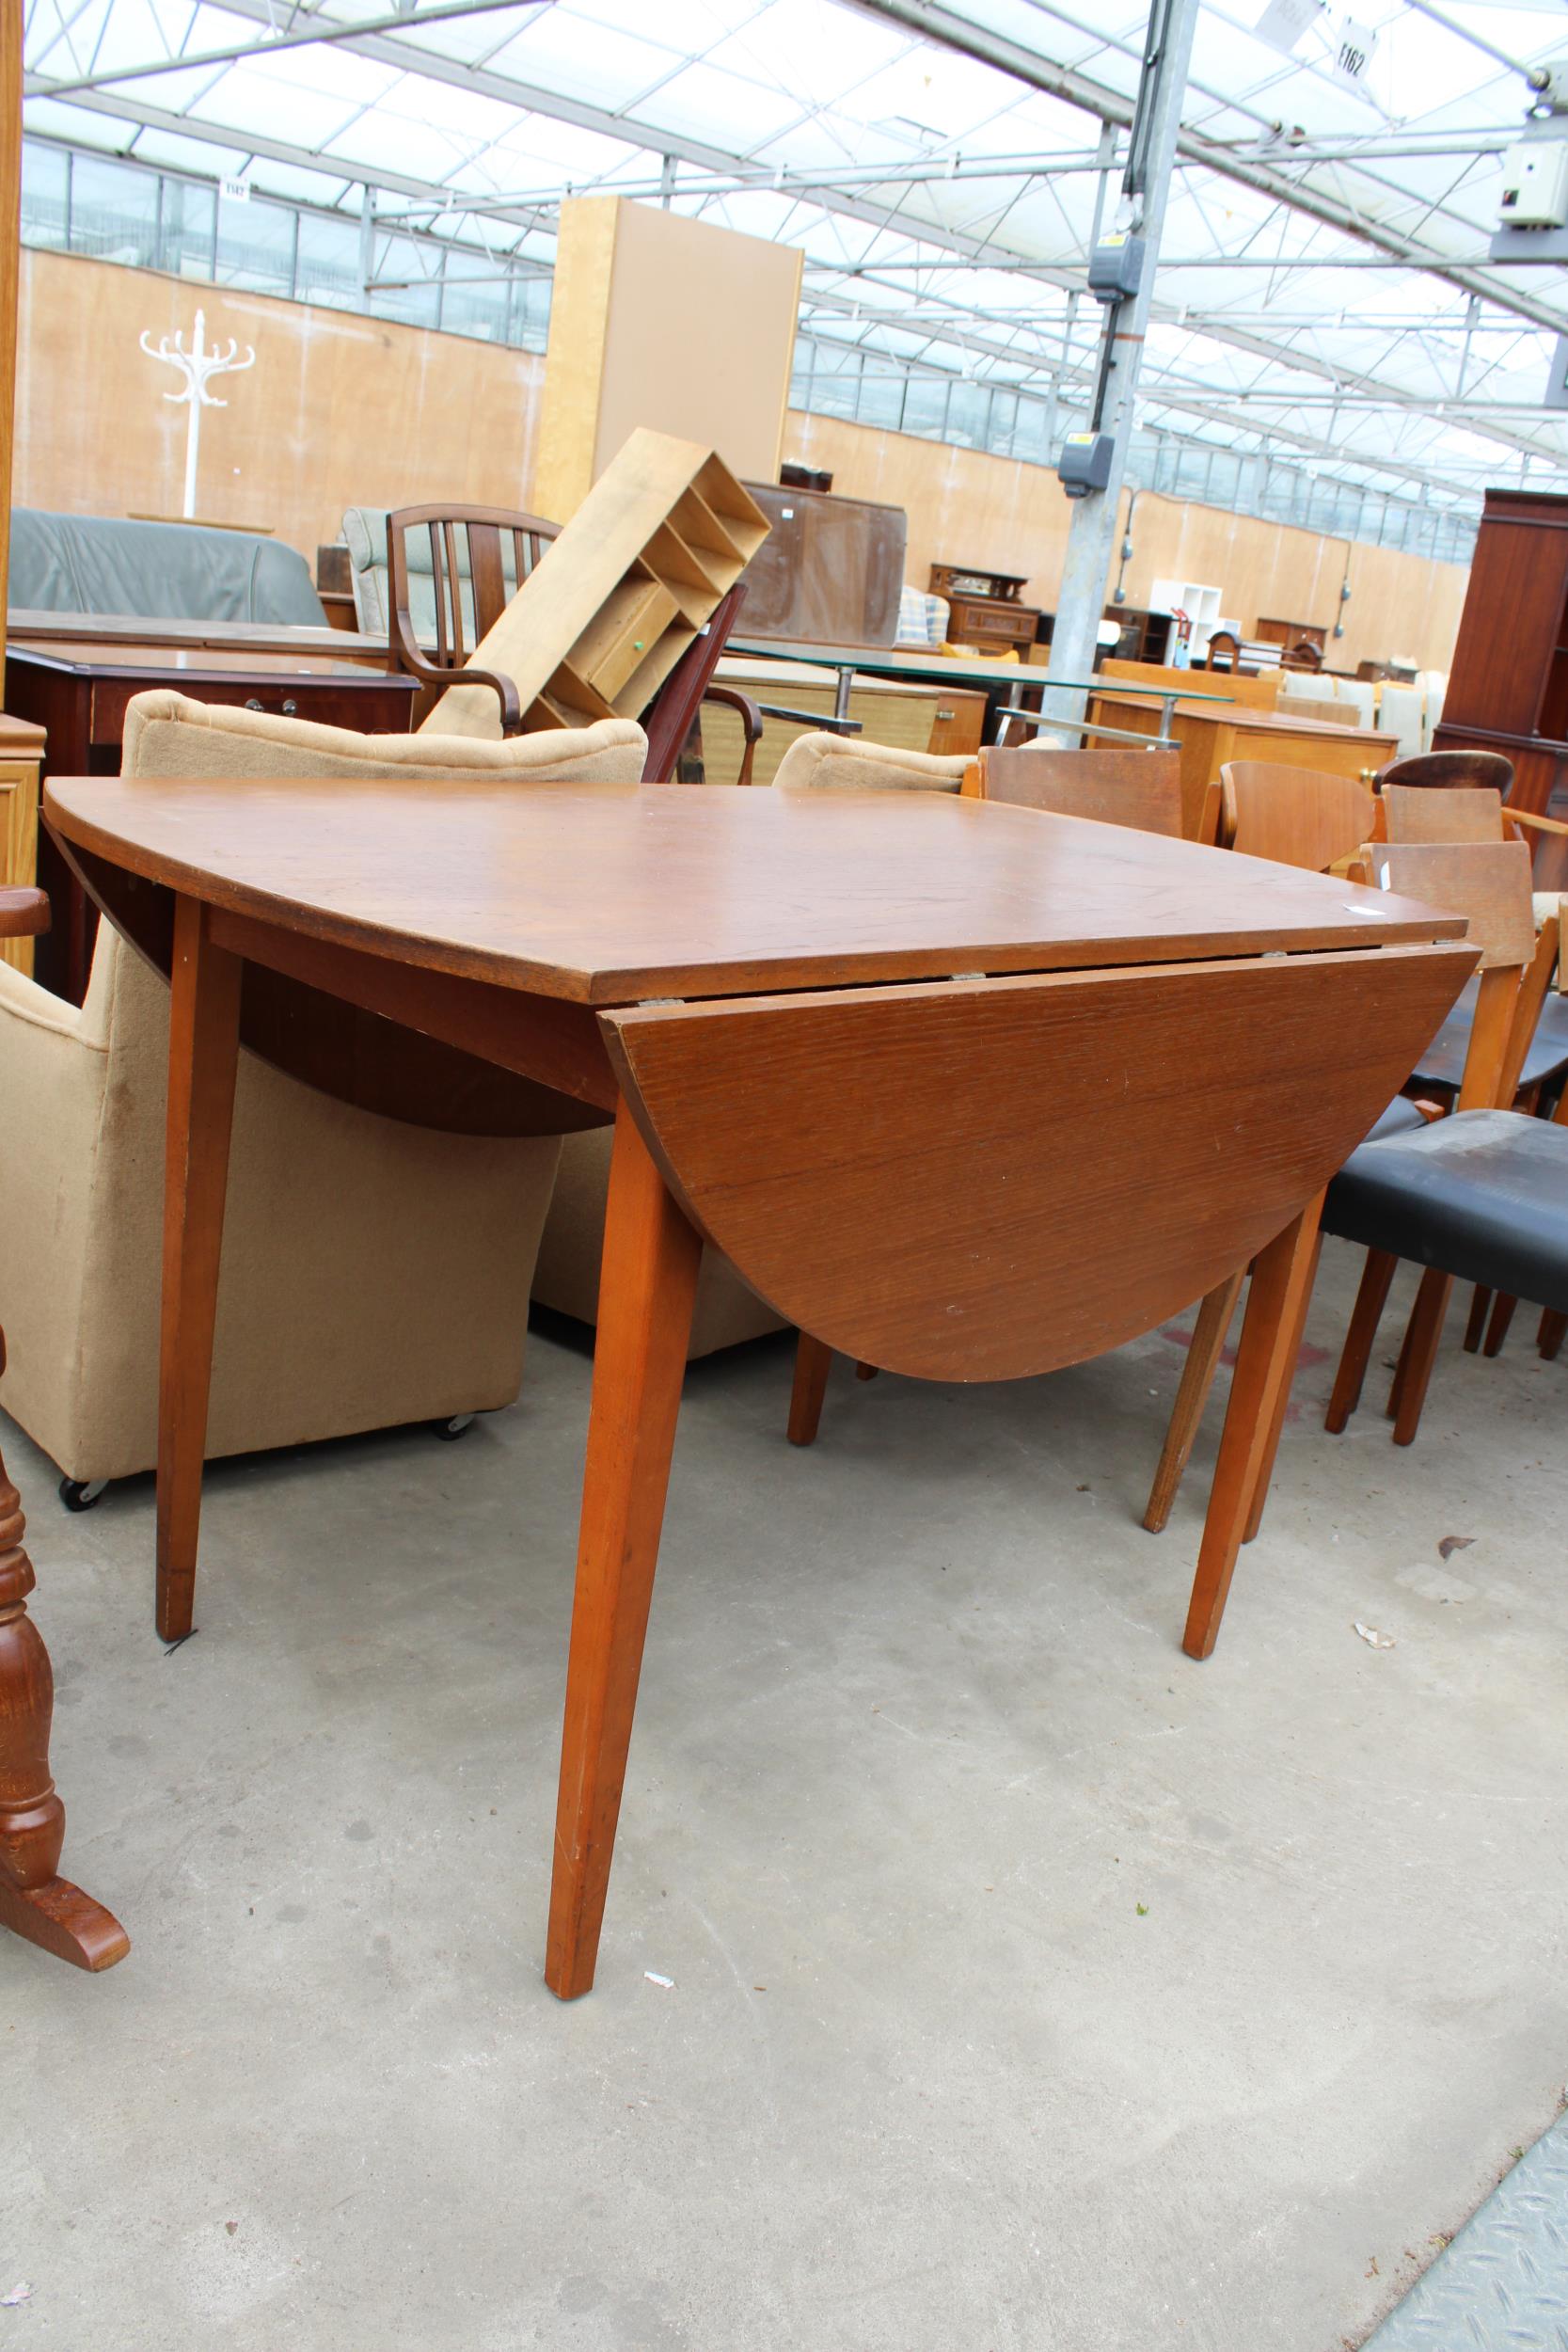 SIX VARIOUS RETRO TEAK DINING CHAIRS AND RETRO TEAK OVAL DROP-LEAF DINING TABLE, 49" X 45" OPENED - Image 2 of 3